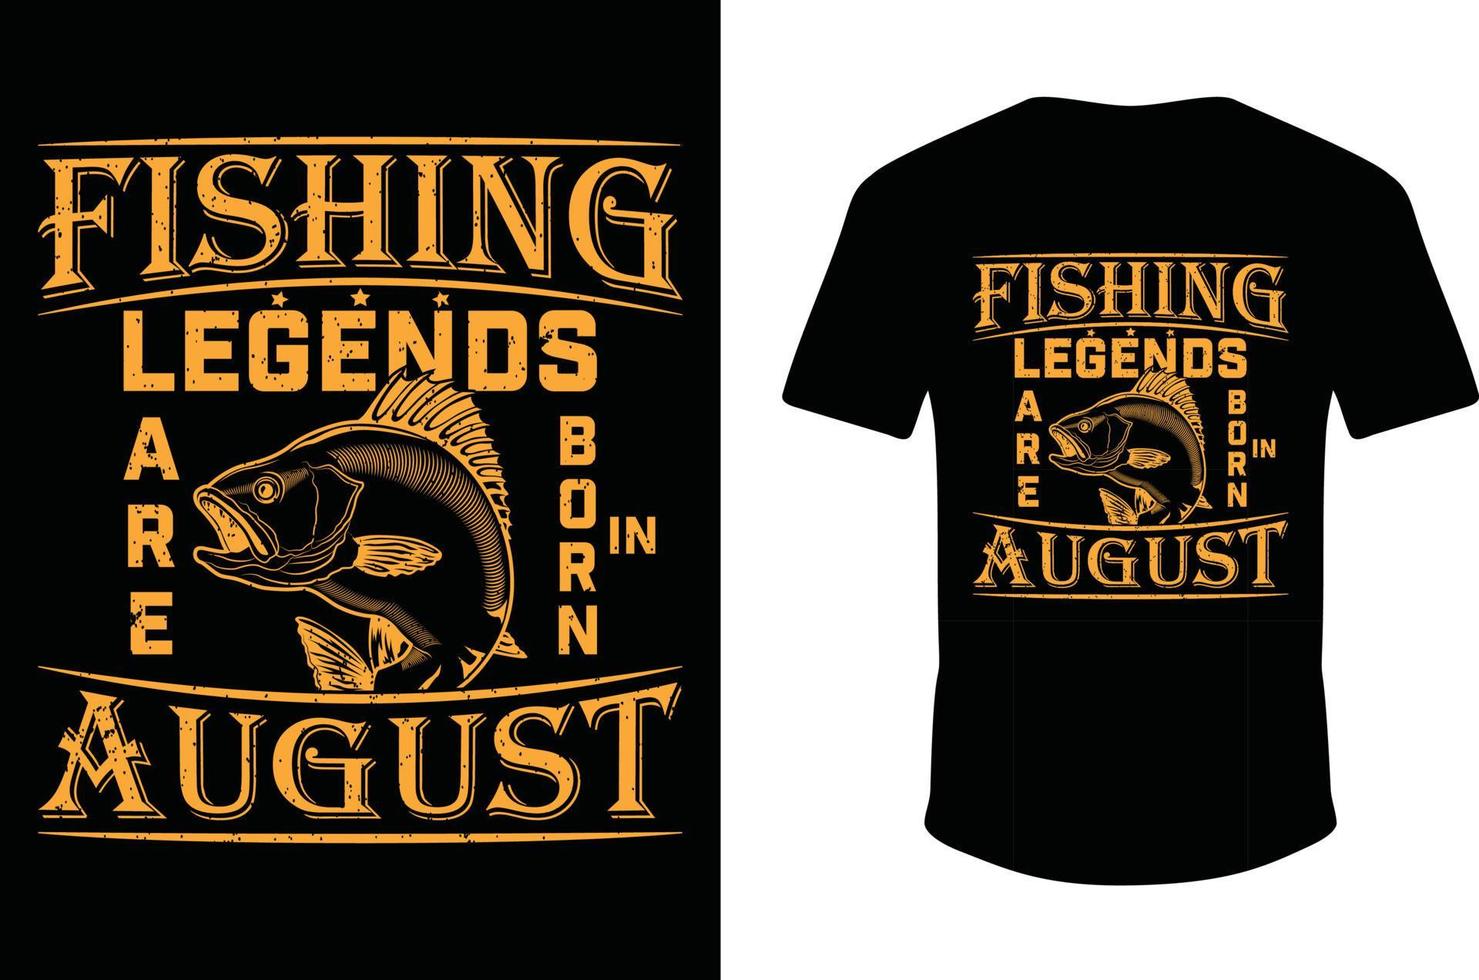 Fishing Legends Are Born in August. Fishing T shirt. Legends Shirt. vector